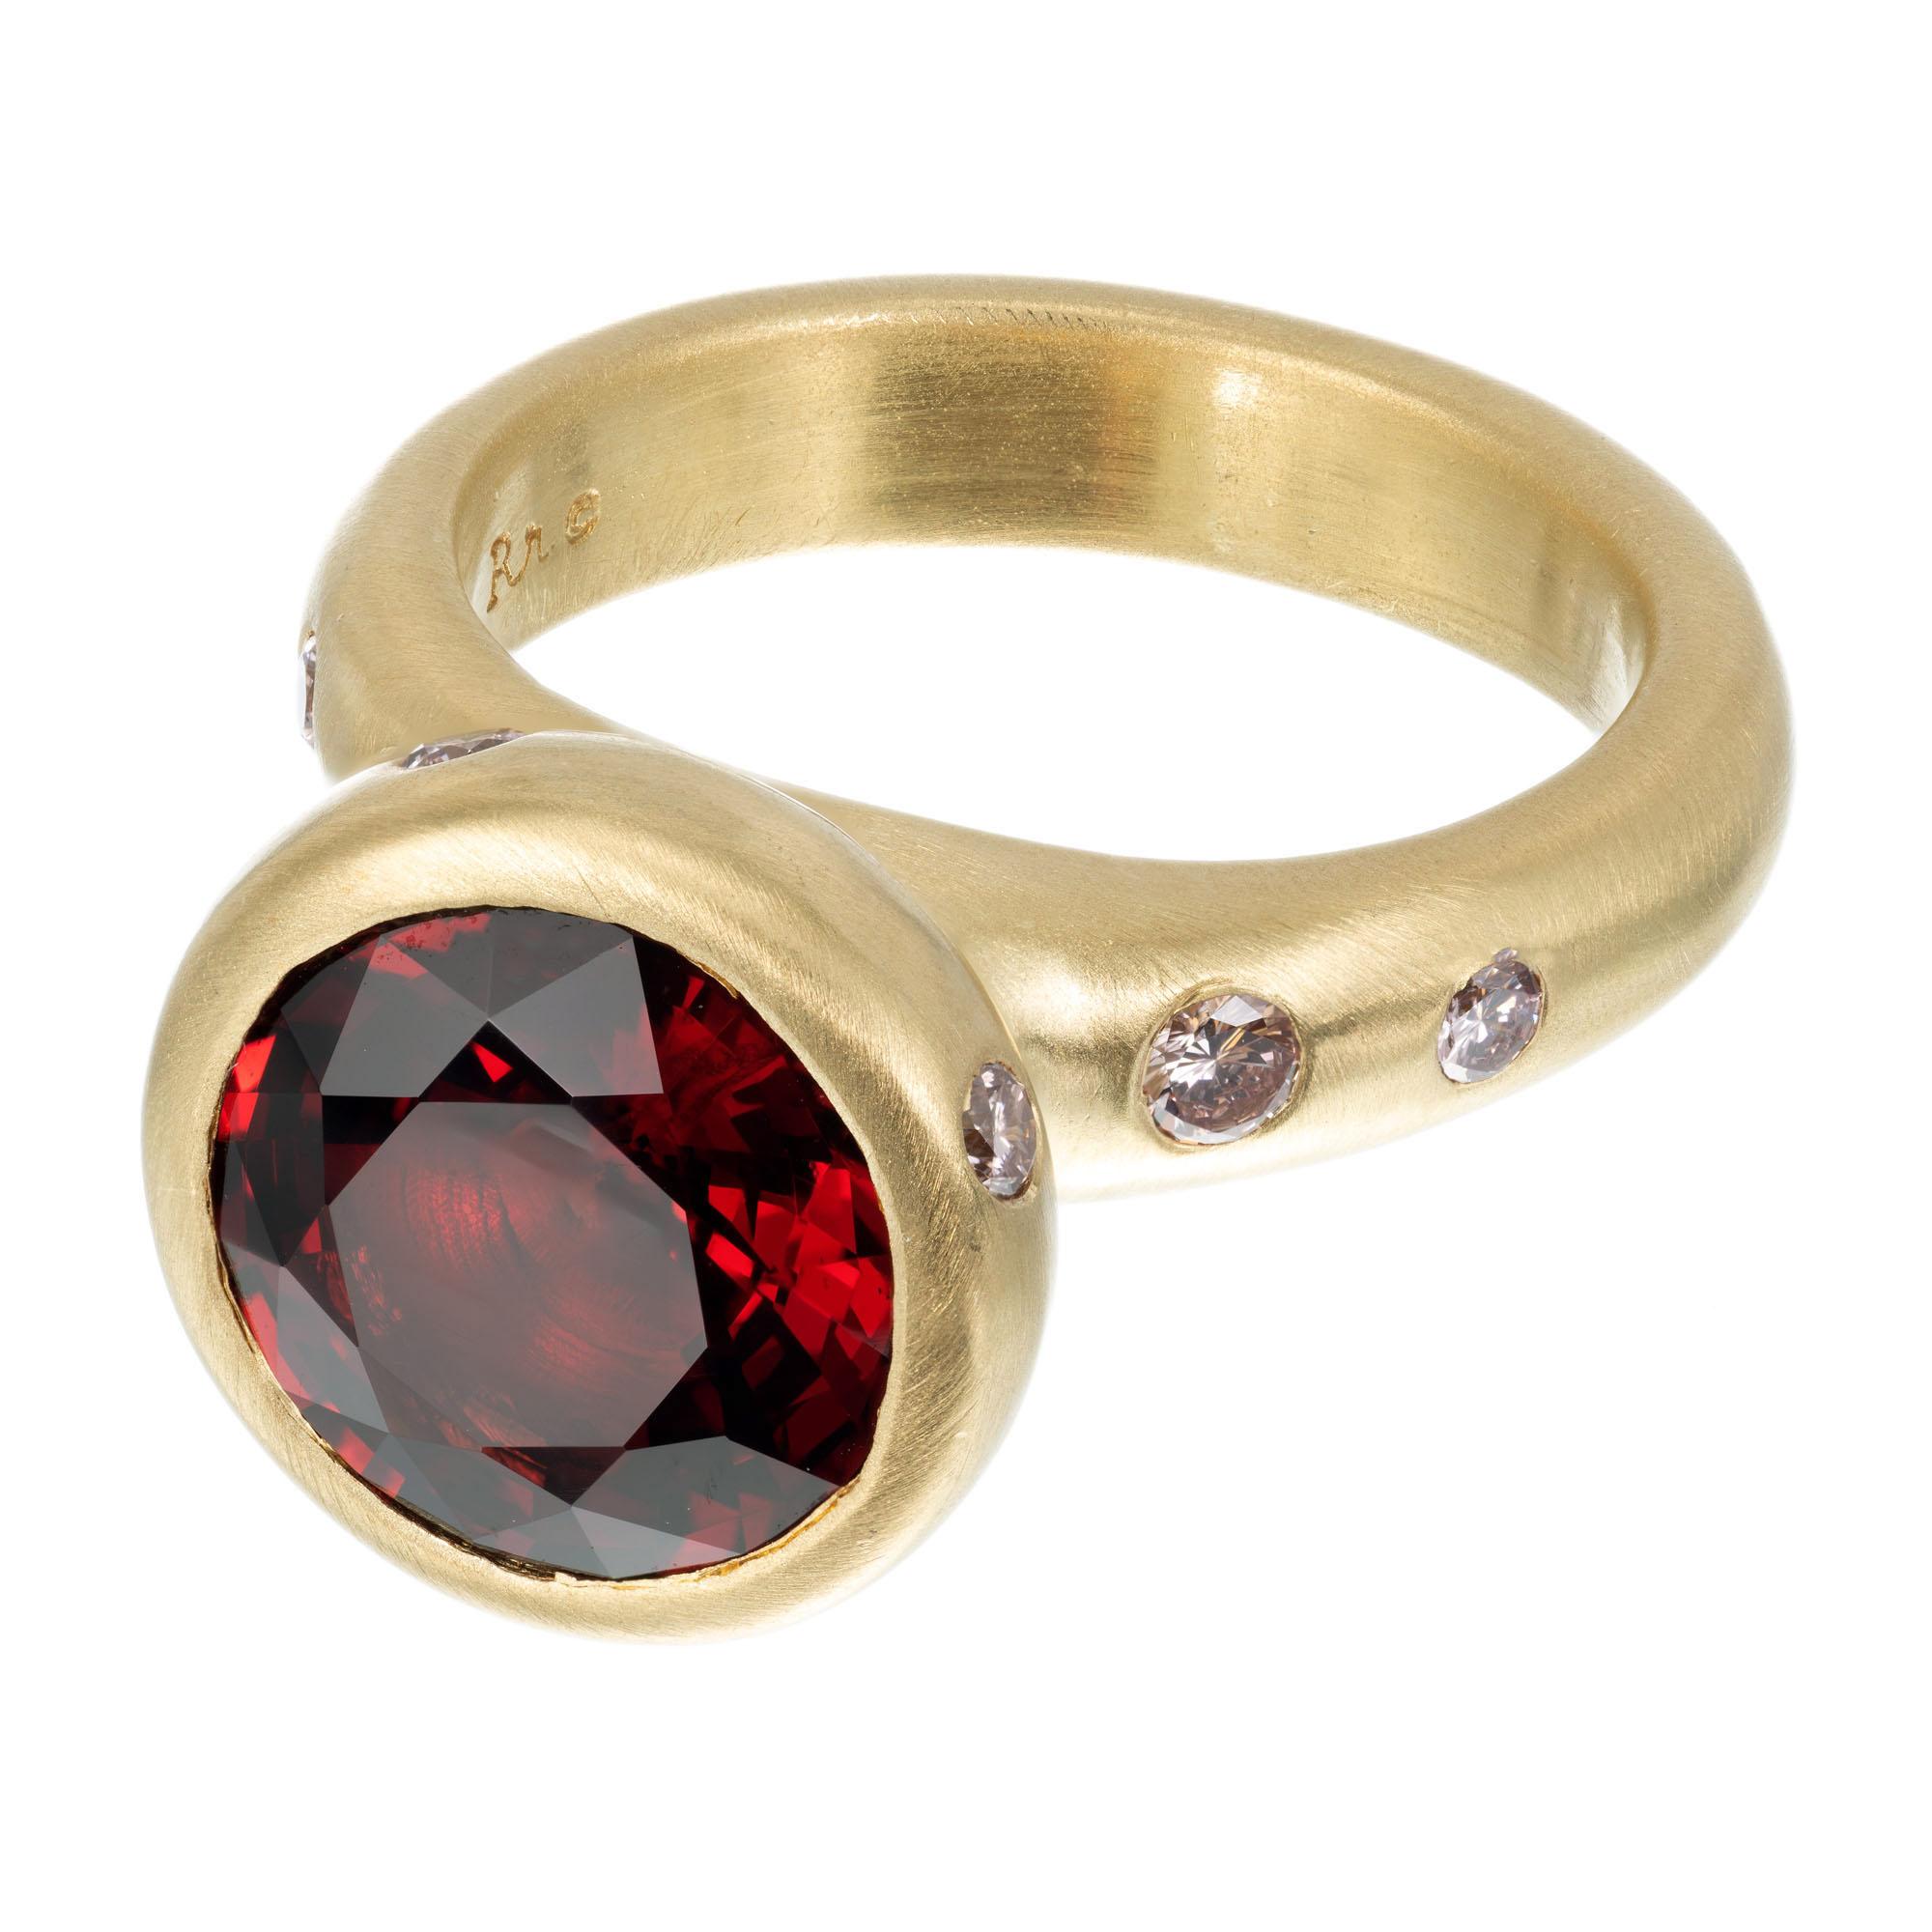 Robin Rotenier round spinel and pink diamond cocktail ring. GIA certified natural. 4.64 center spinel with 11 round pink accent diamonds in a 18k yellow gold setting. Signed Rotenier 

1 natural round red spinel VS, approx. 4.64ct GIA Certificate #